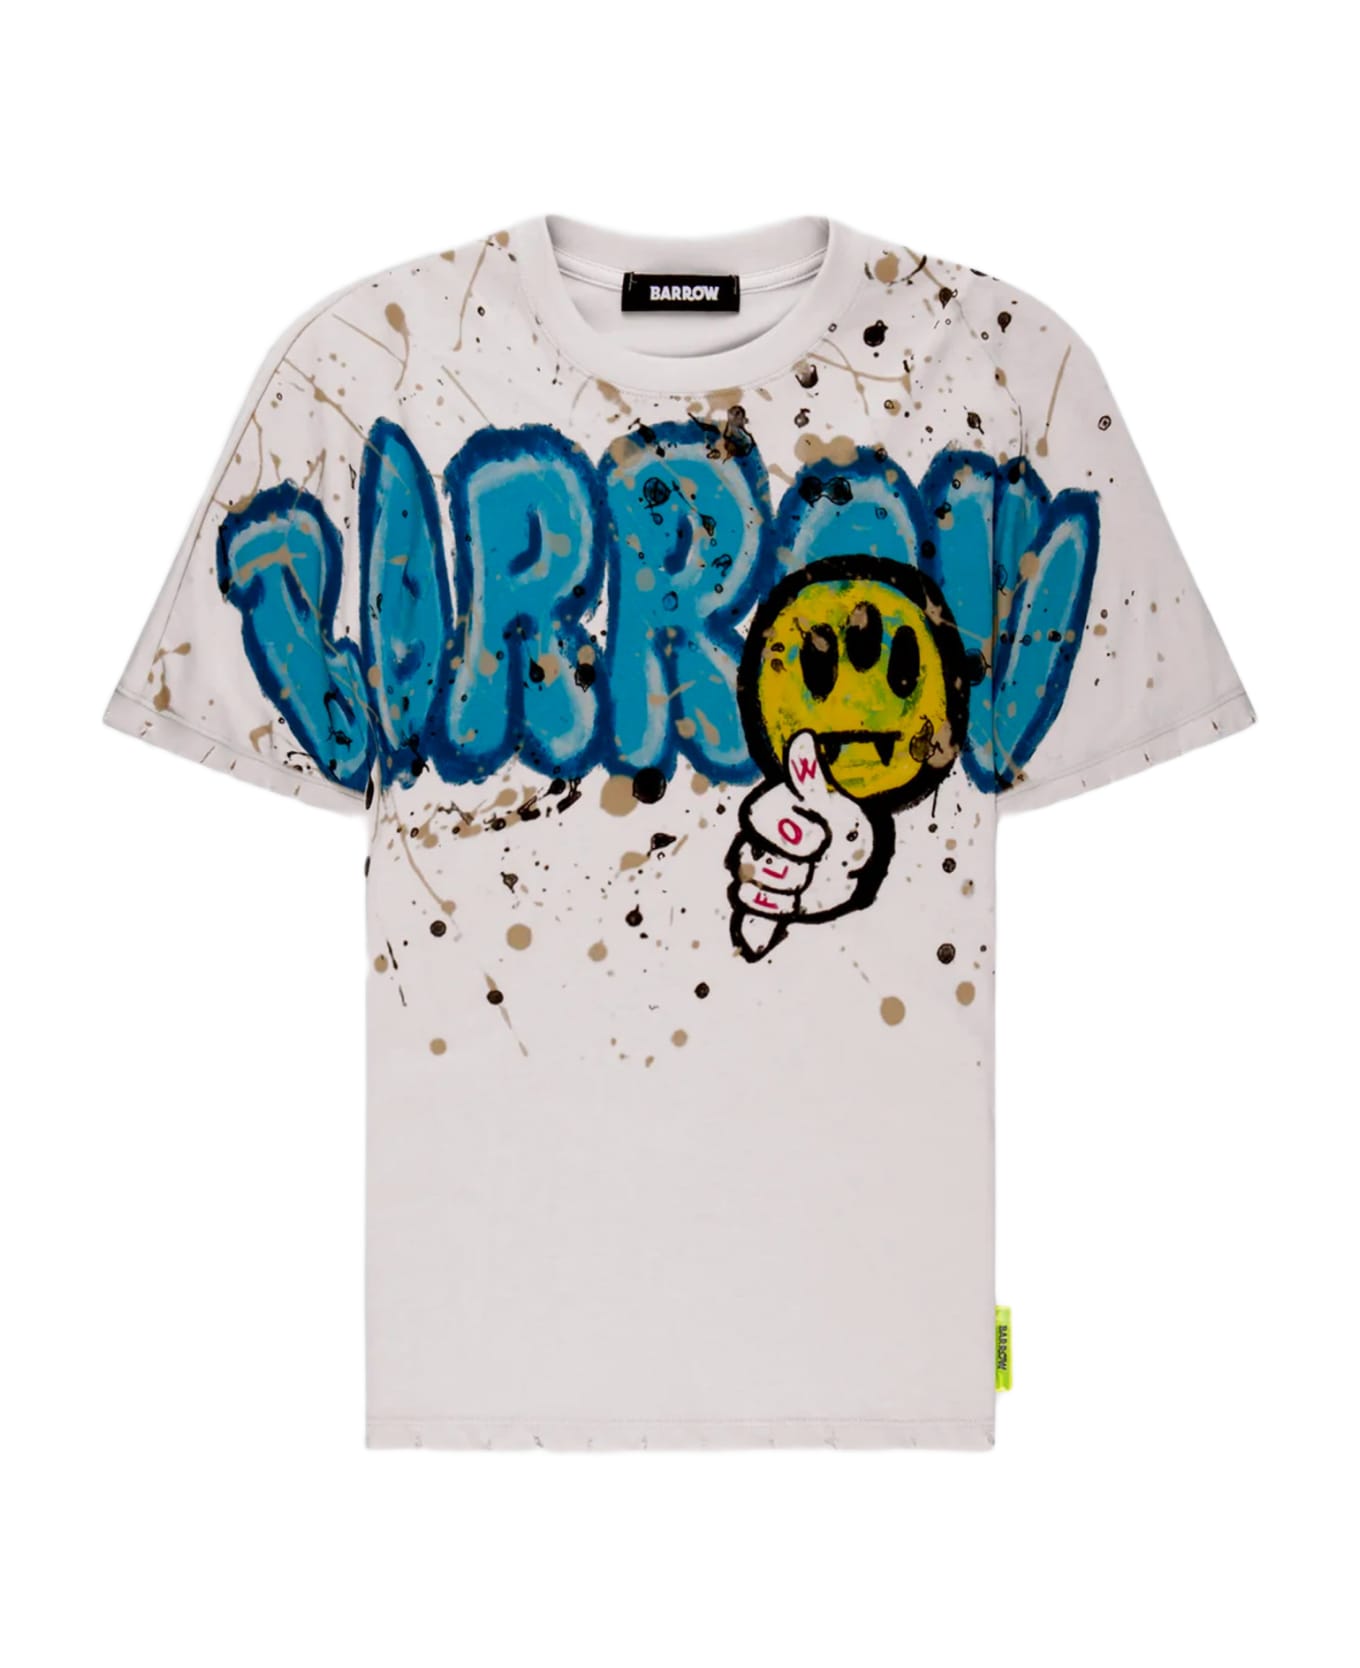 Barrow Jersey T-shirt Unisex Off White Cotton T-shirt With Graffiti Logo And Smile Print Barrow